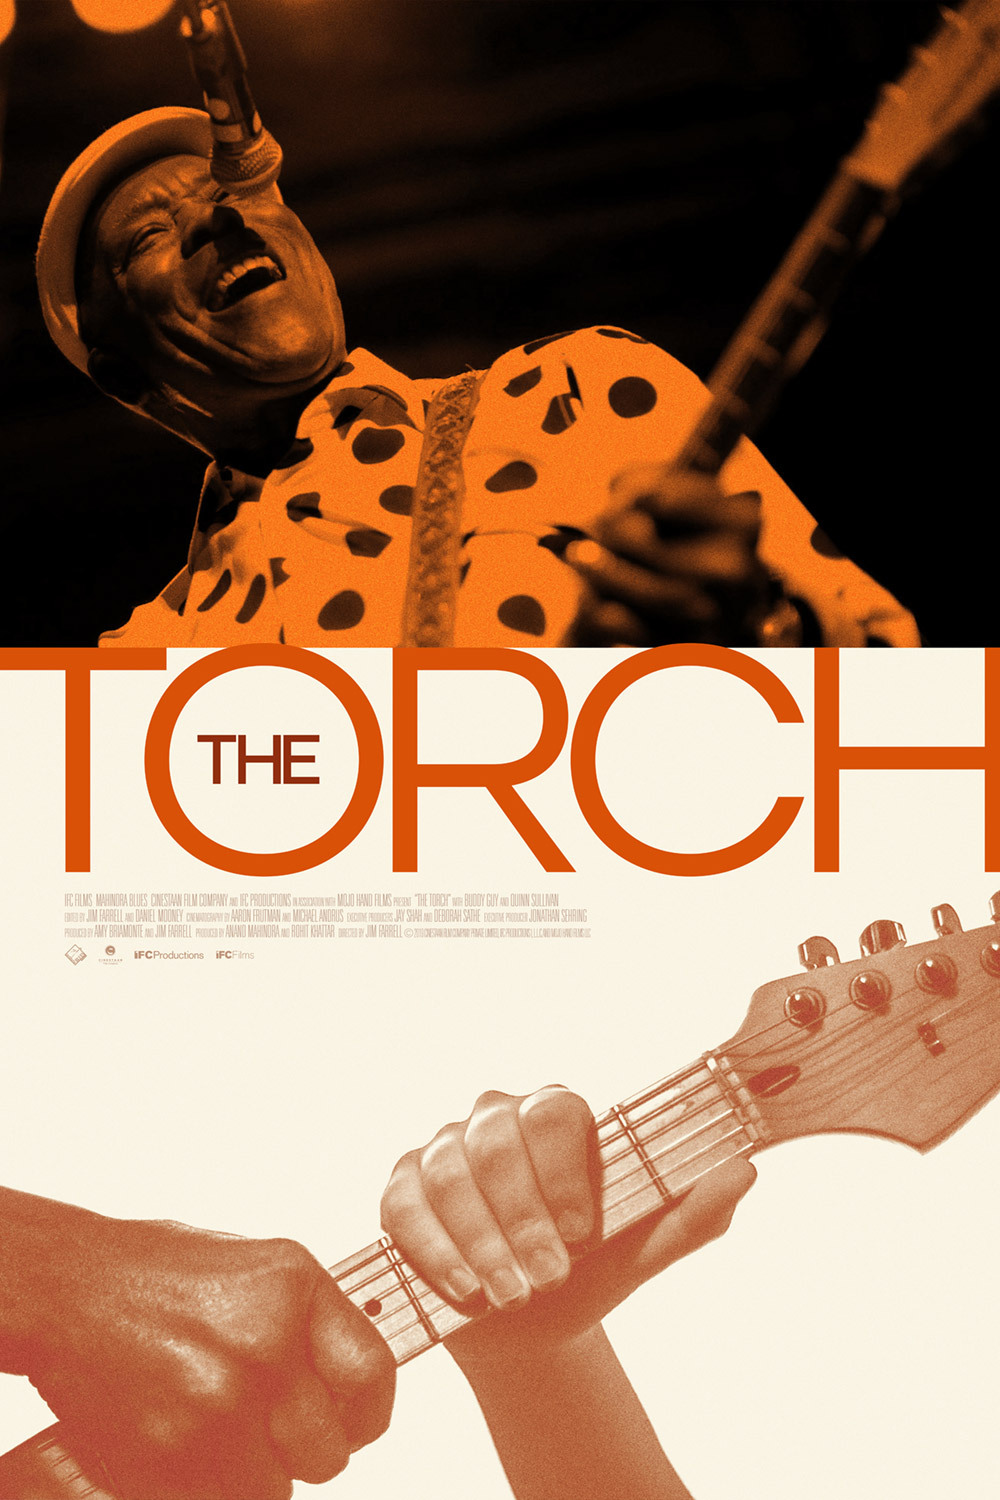 Movie poster for The Torch, Buddy Guy singing and playing guitar